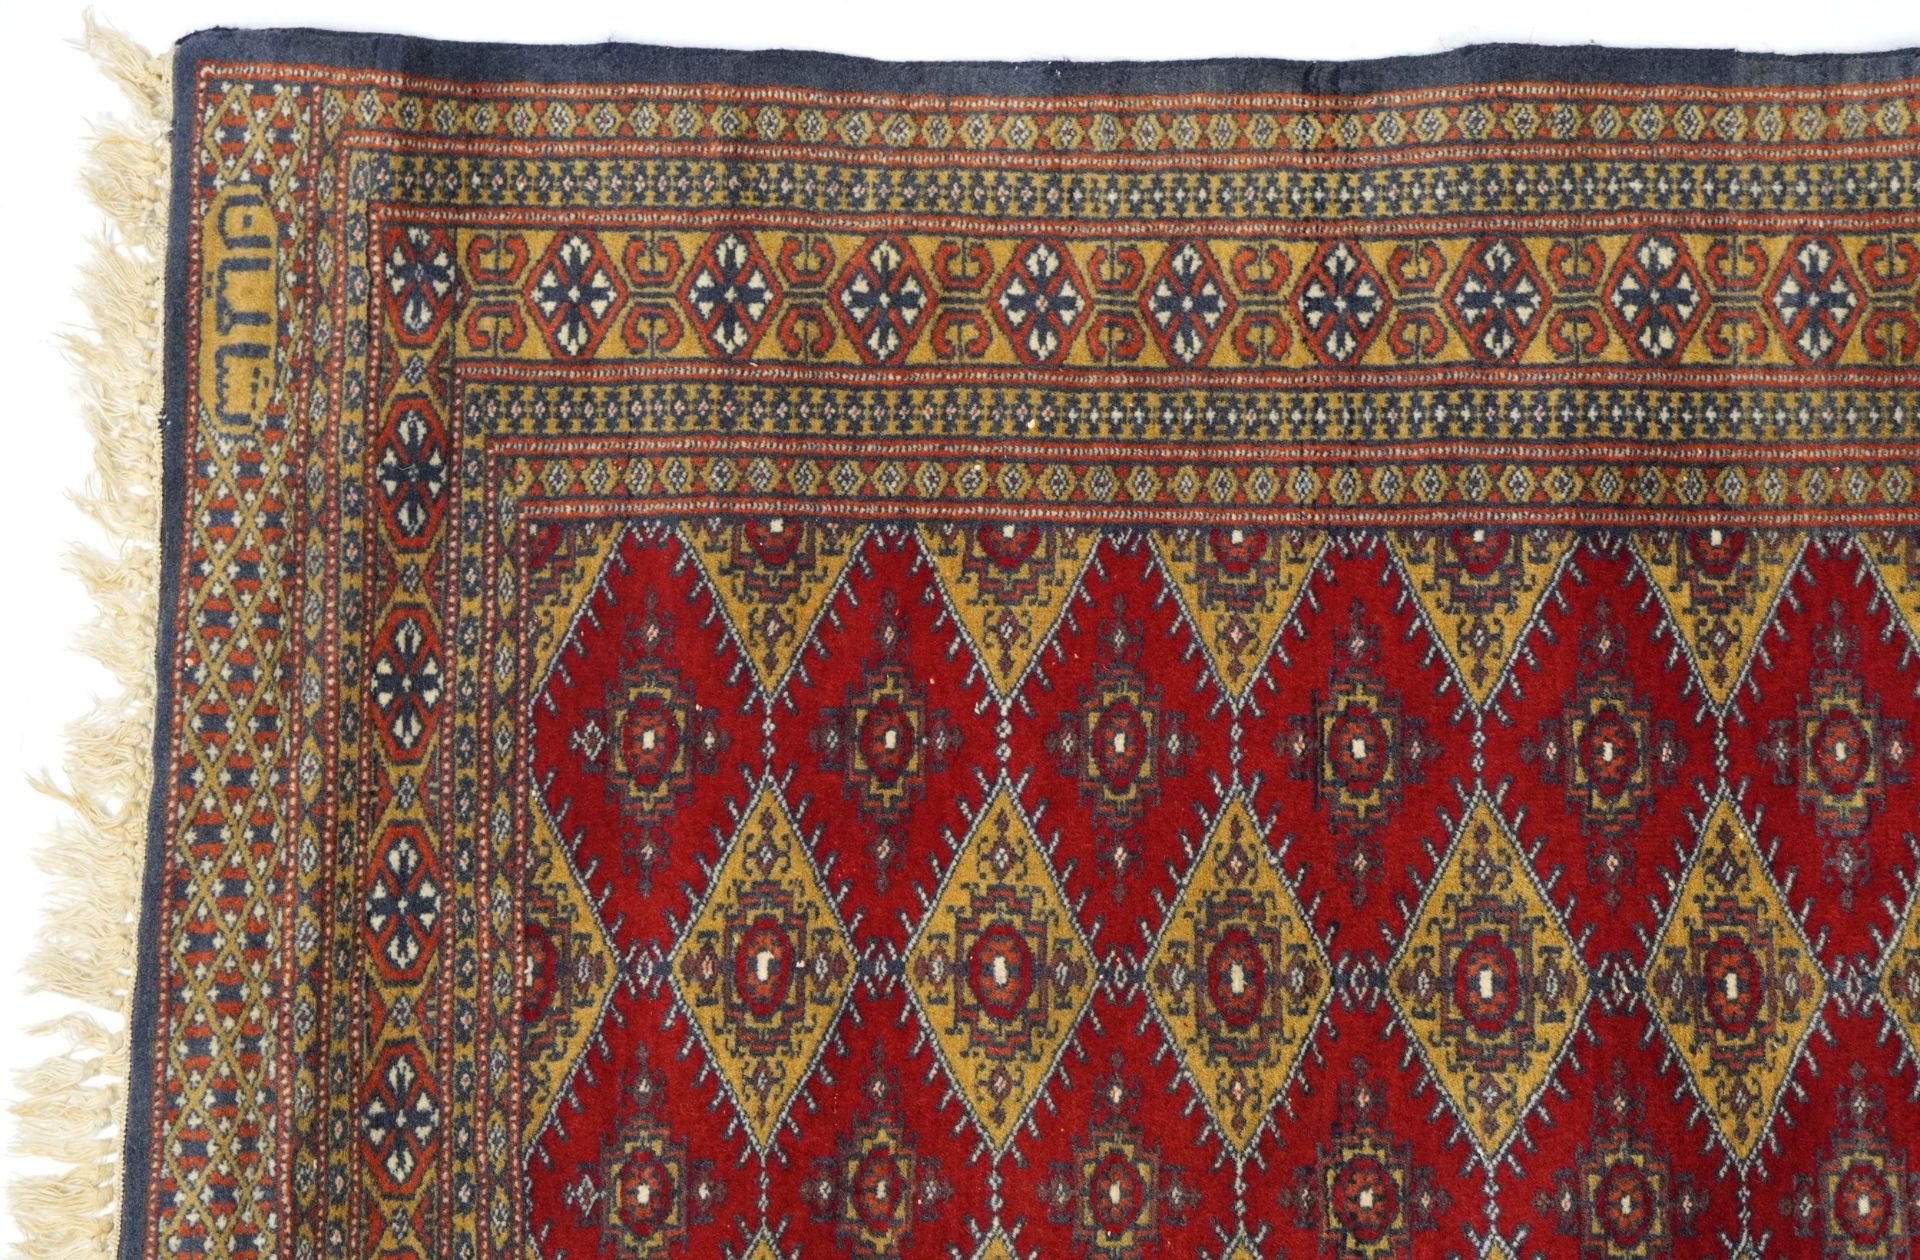 Rectangular red and blue ground rug with all over geometric design, 145cm x 91cm - Image 2 of 6